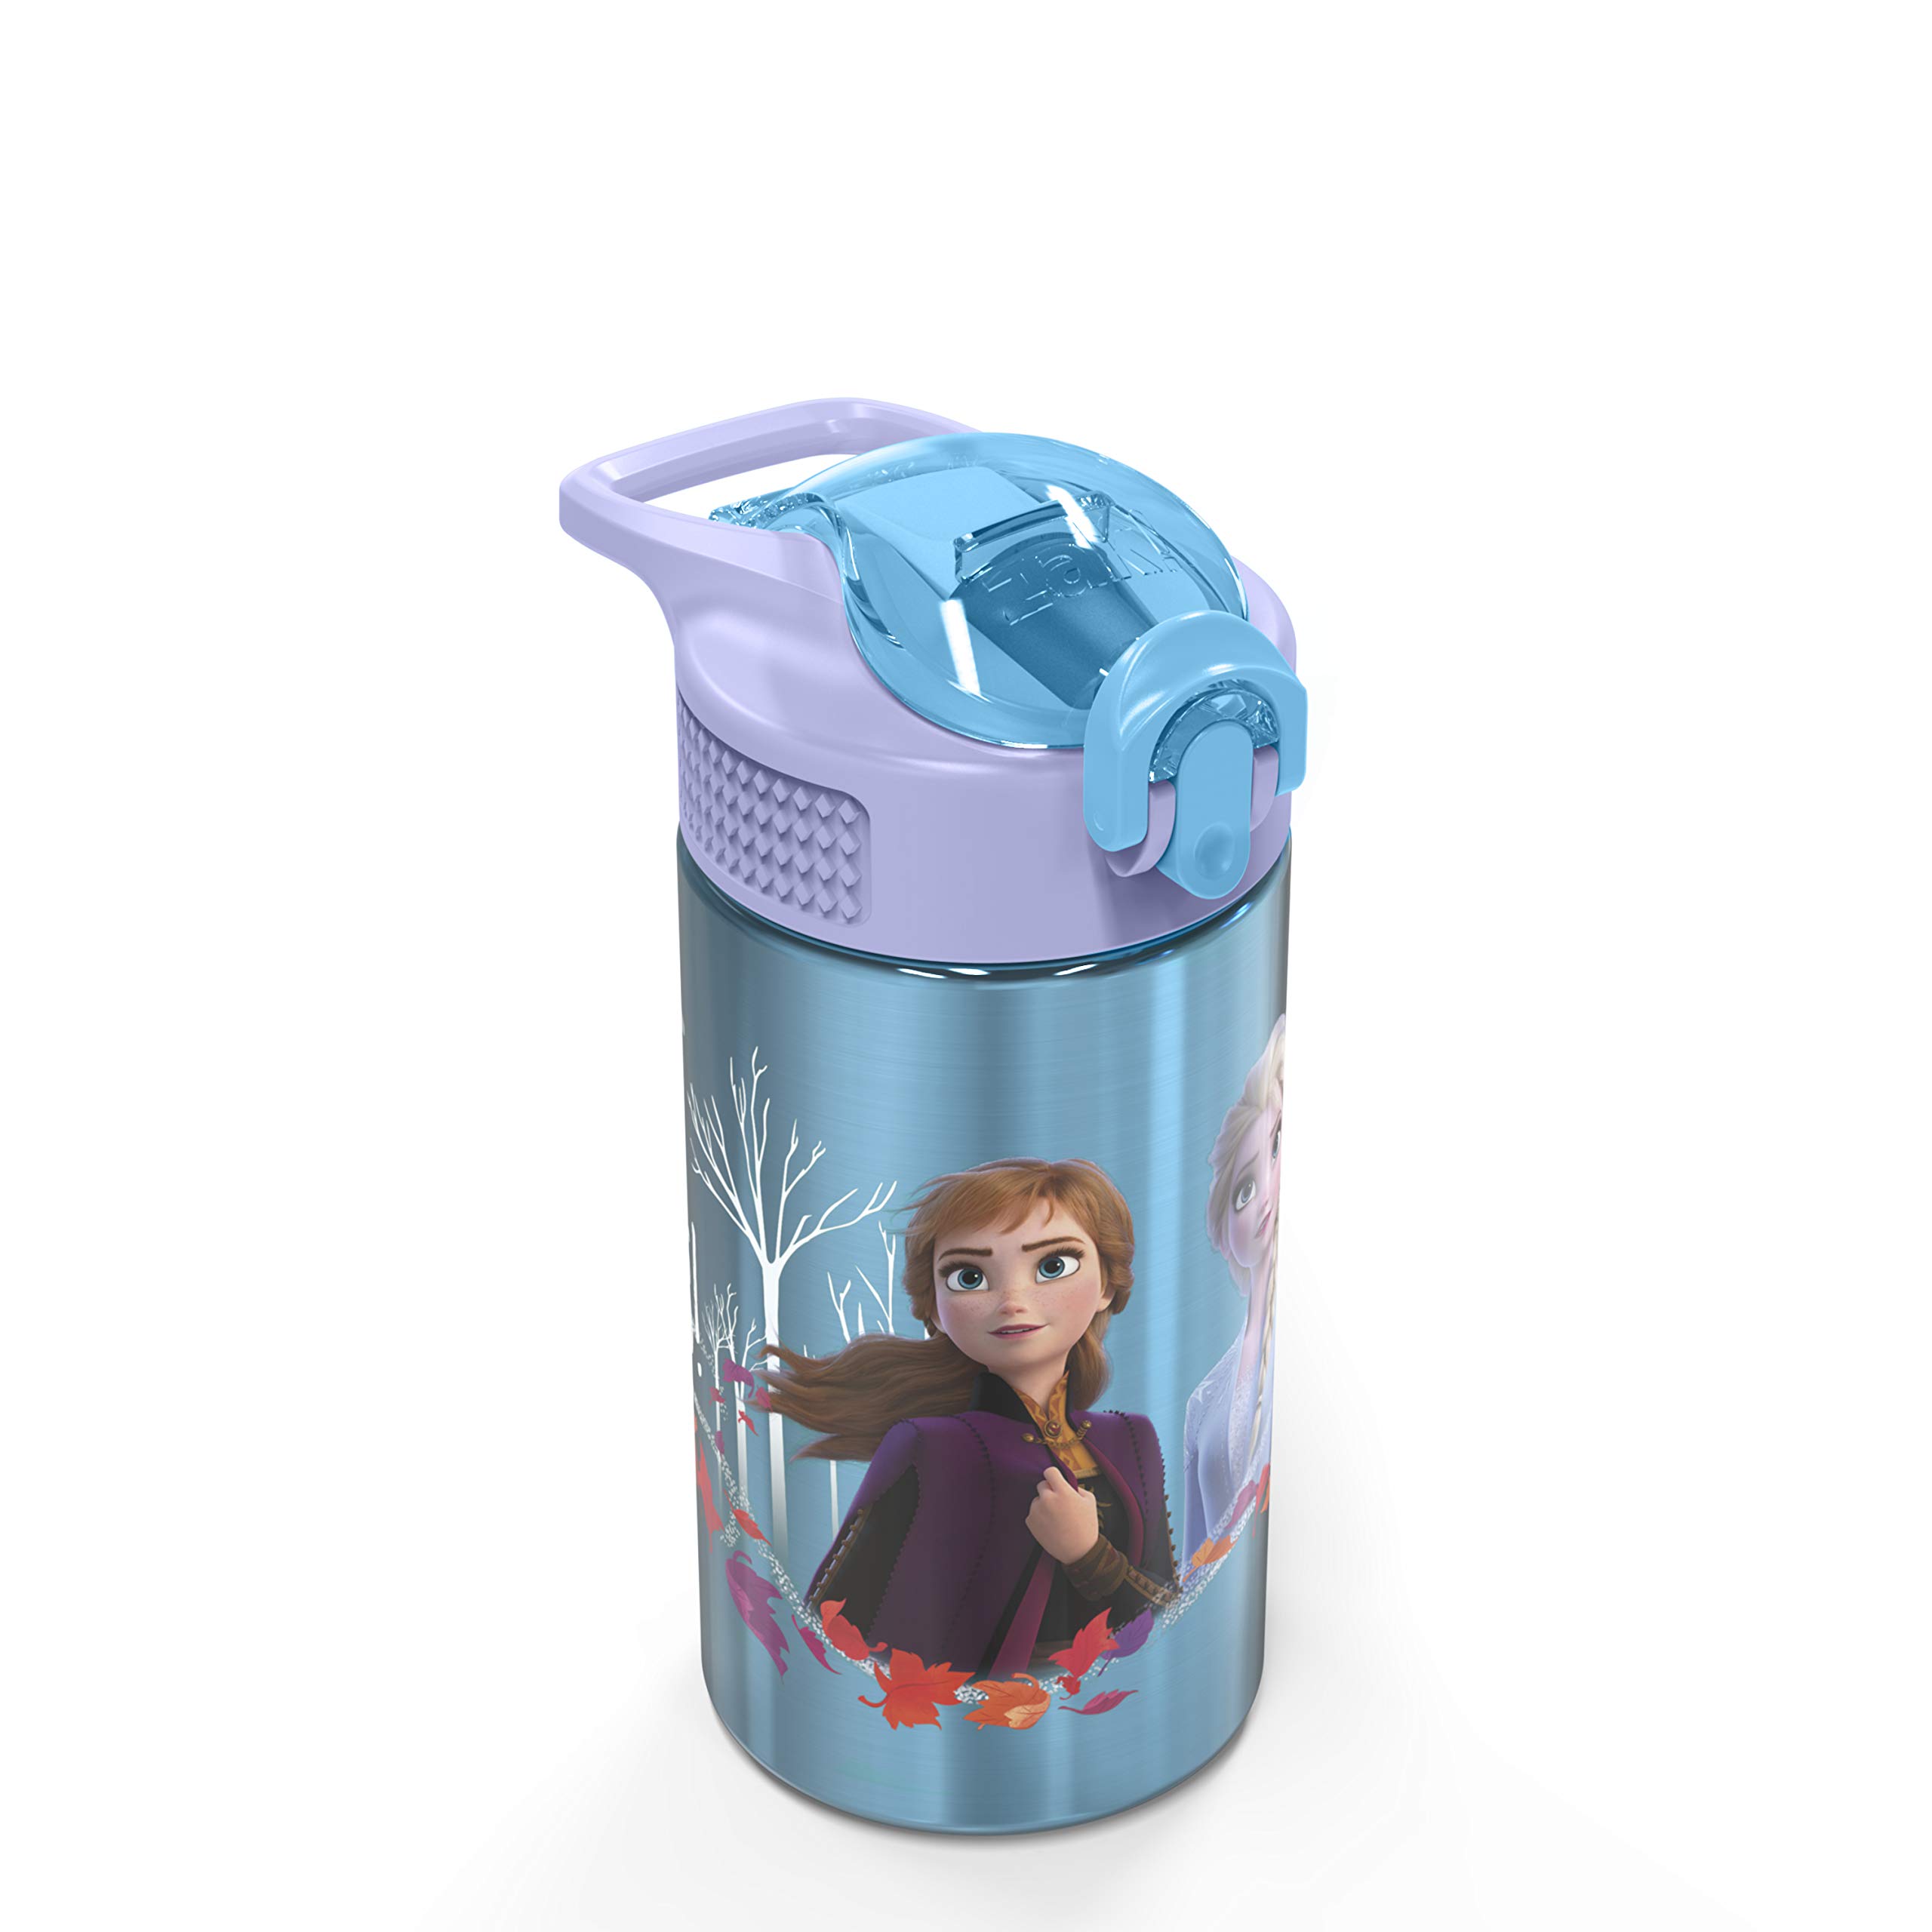 Zak Designs Frozen II 15.5oz Stainless Steel Kids Water Bottle with Flip-up Straw Spout - BPA Free Durable Design, (Elsa And Anna) (FRZA-S730-C)